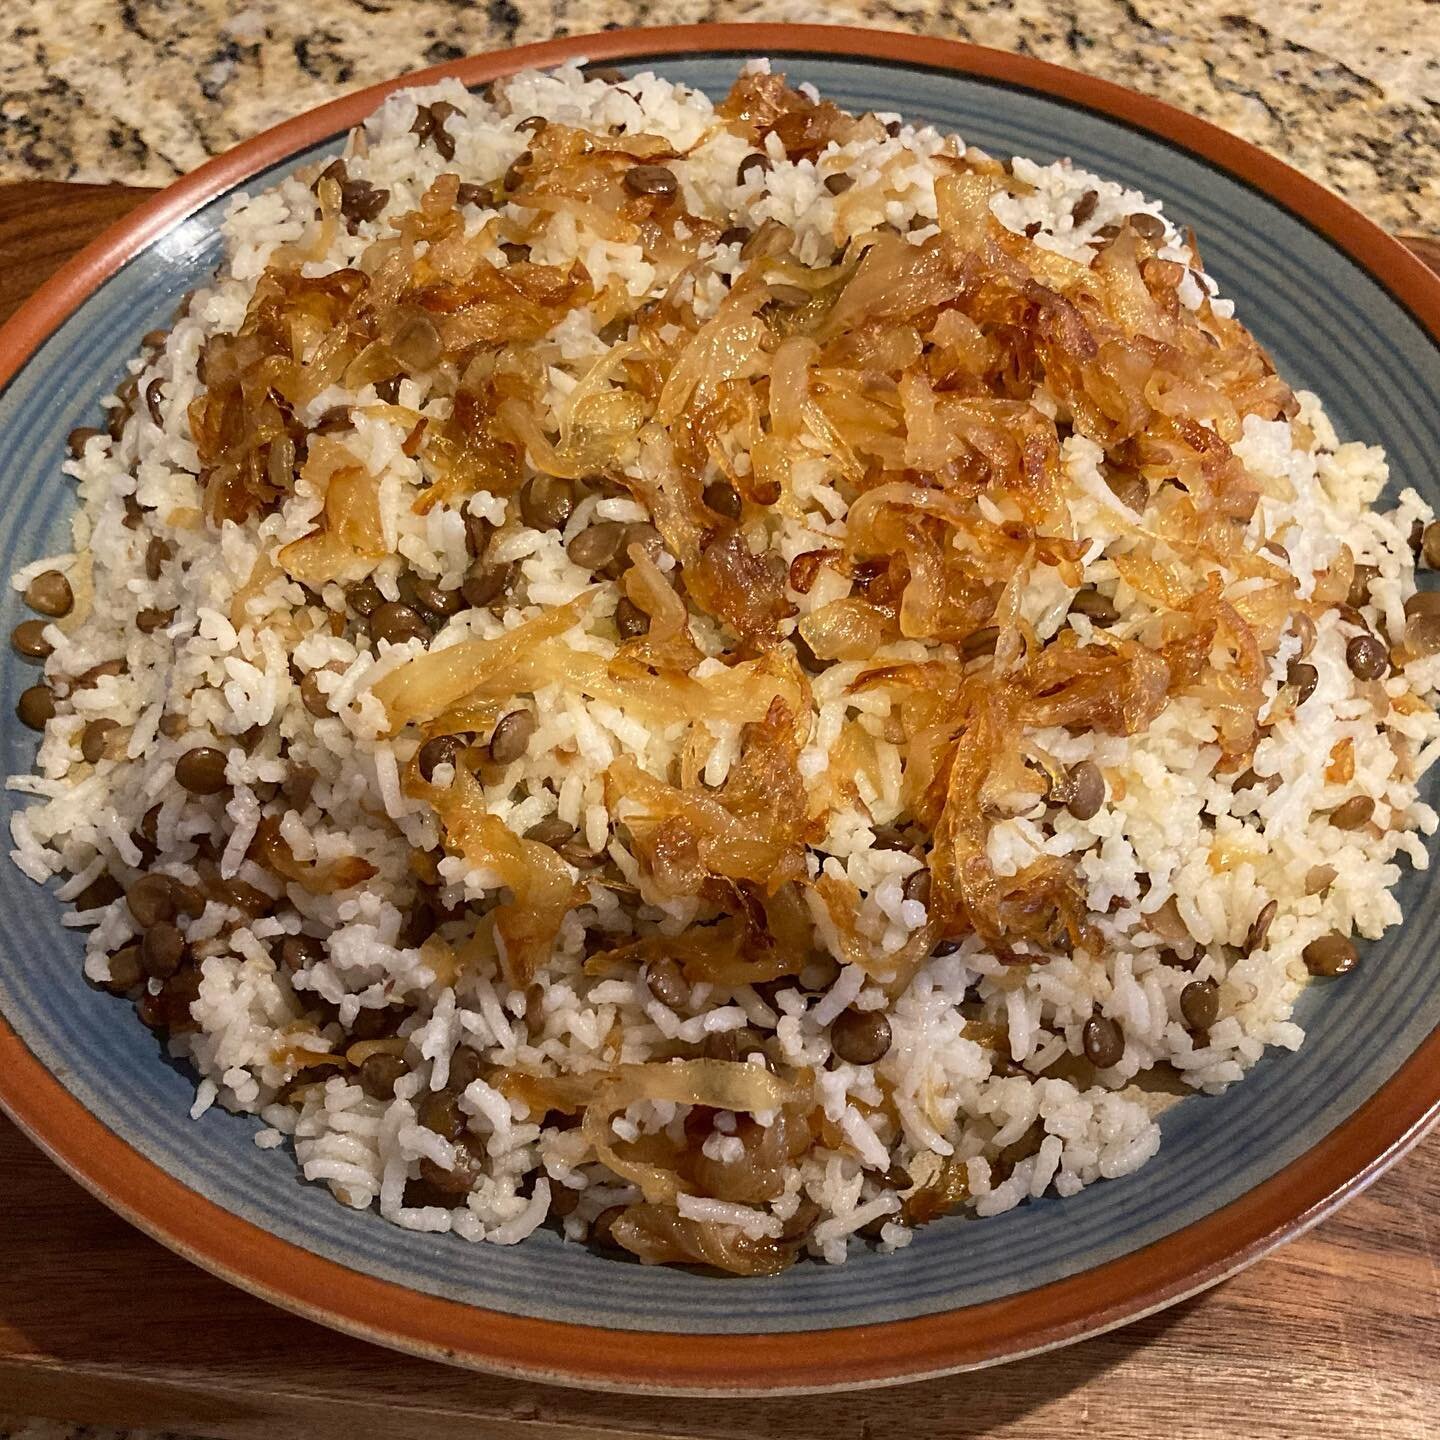 Mujedarra is loved by anyone who tastes it. How can a Rice and Lentil Syrian dish be so good? It&rsquo;s the caramelized onions of course!  #aleppocooking  #middleeasternfood #syrianfood  #sitto  #lentilrecipe